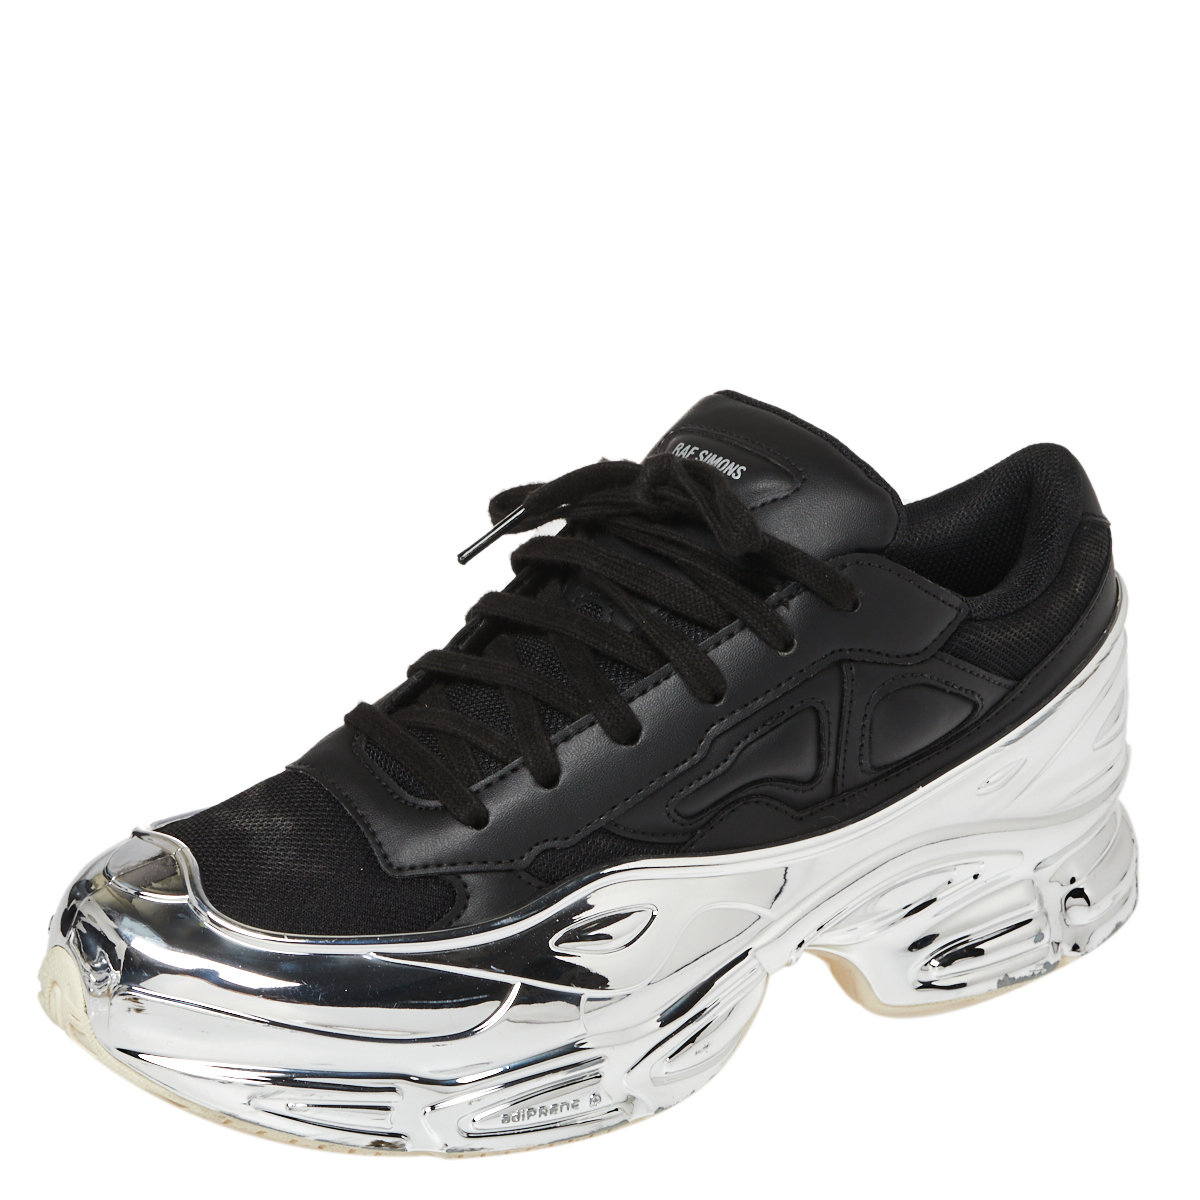 Adidas By Raf Simons Black/Silver Leather Ozweego Core Sneakers Size 42